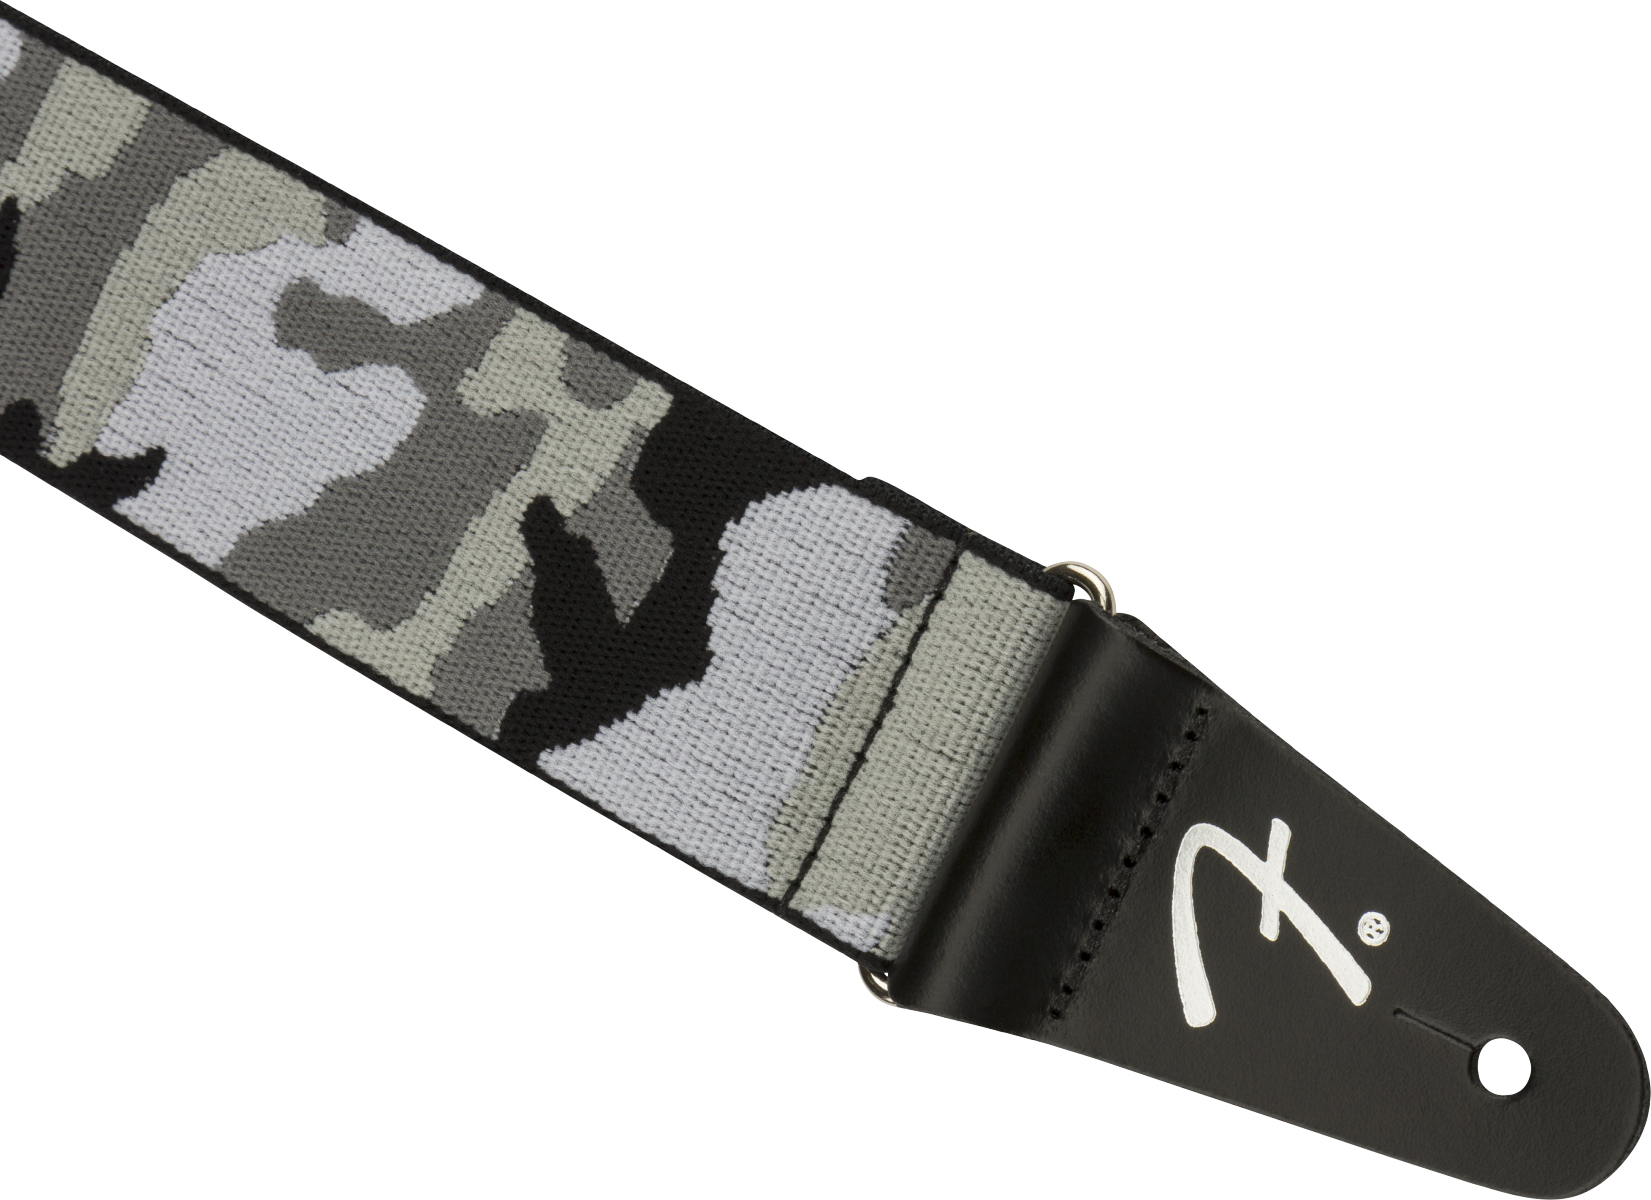 Fender Weighless 2 Inches Camo Guitar Strap Gray - Guitar strap - Variation 1